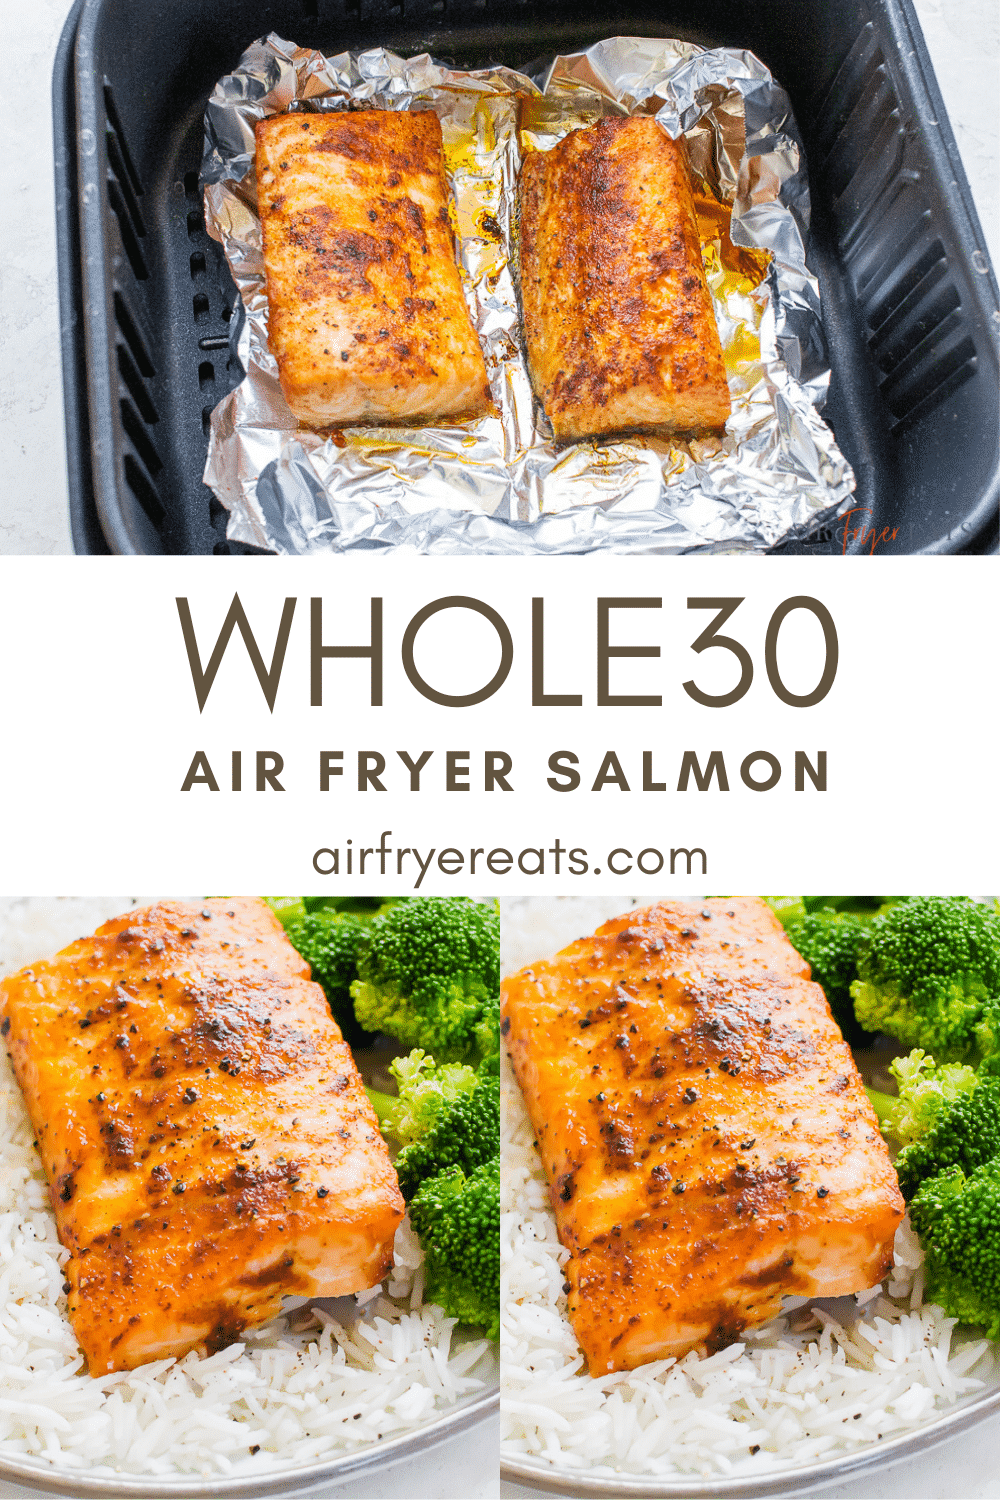 Why go out to a restaurant when you can have tender, flaky salmon right at home? You won't believe how easy it is to make this 10 minute Air Fryer Salmon! #airfryersalmon #salmon #airfryerrecipes via @vegetarianmamma